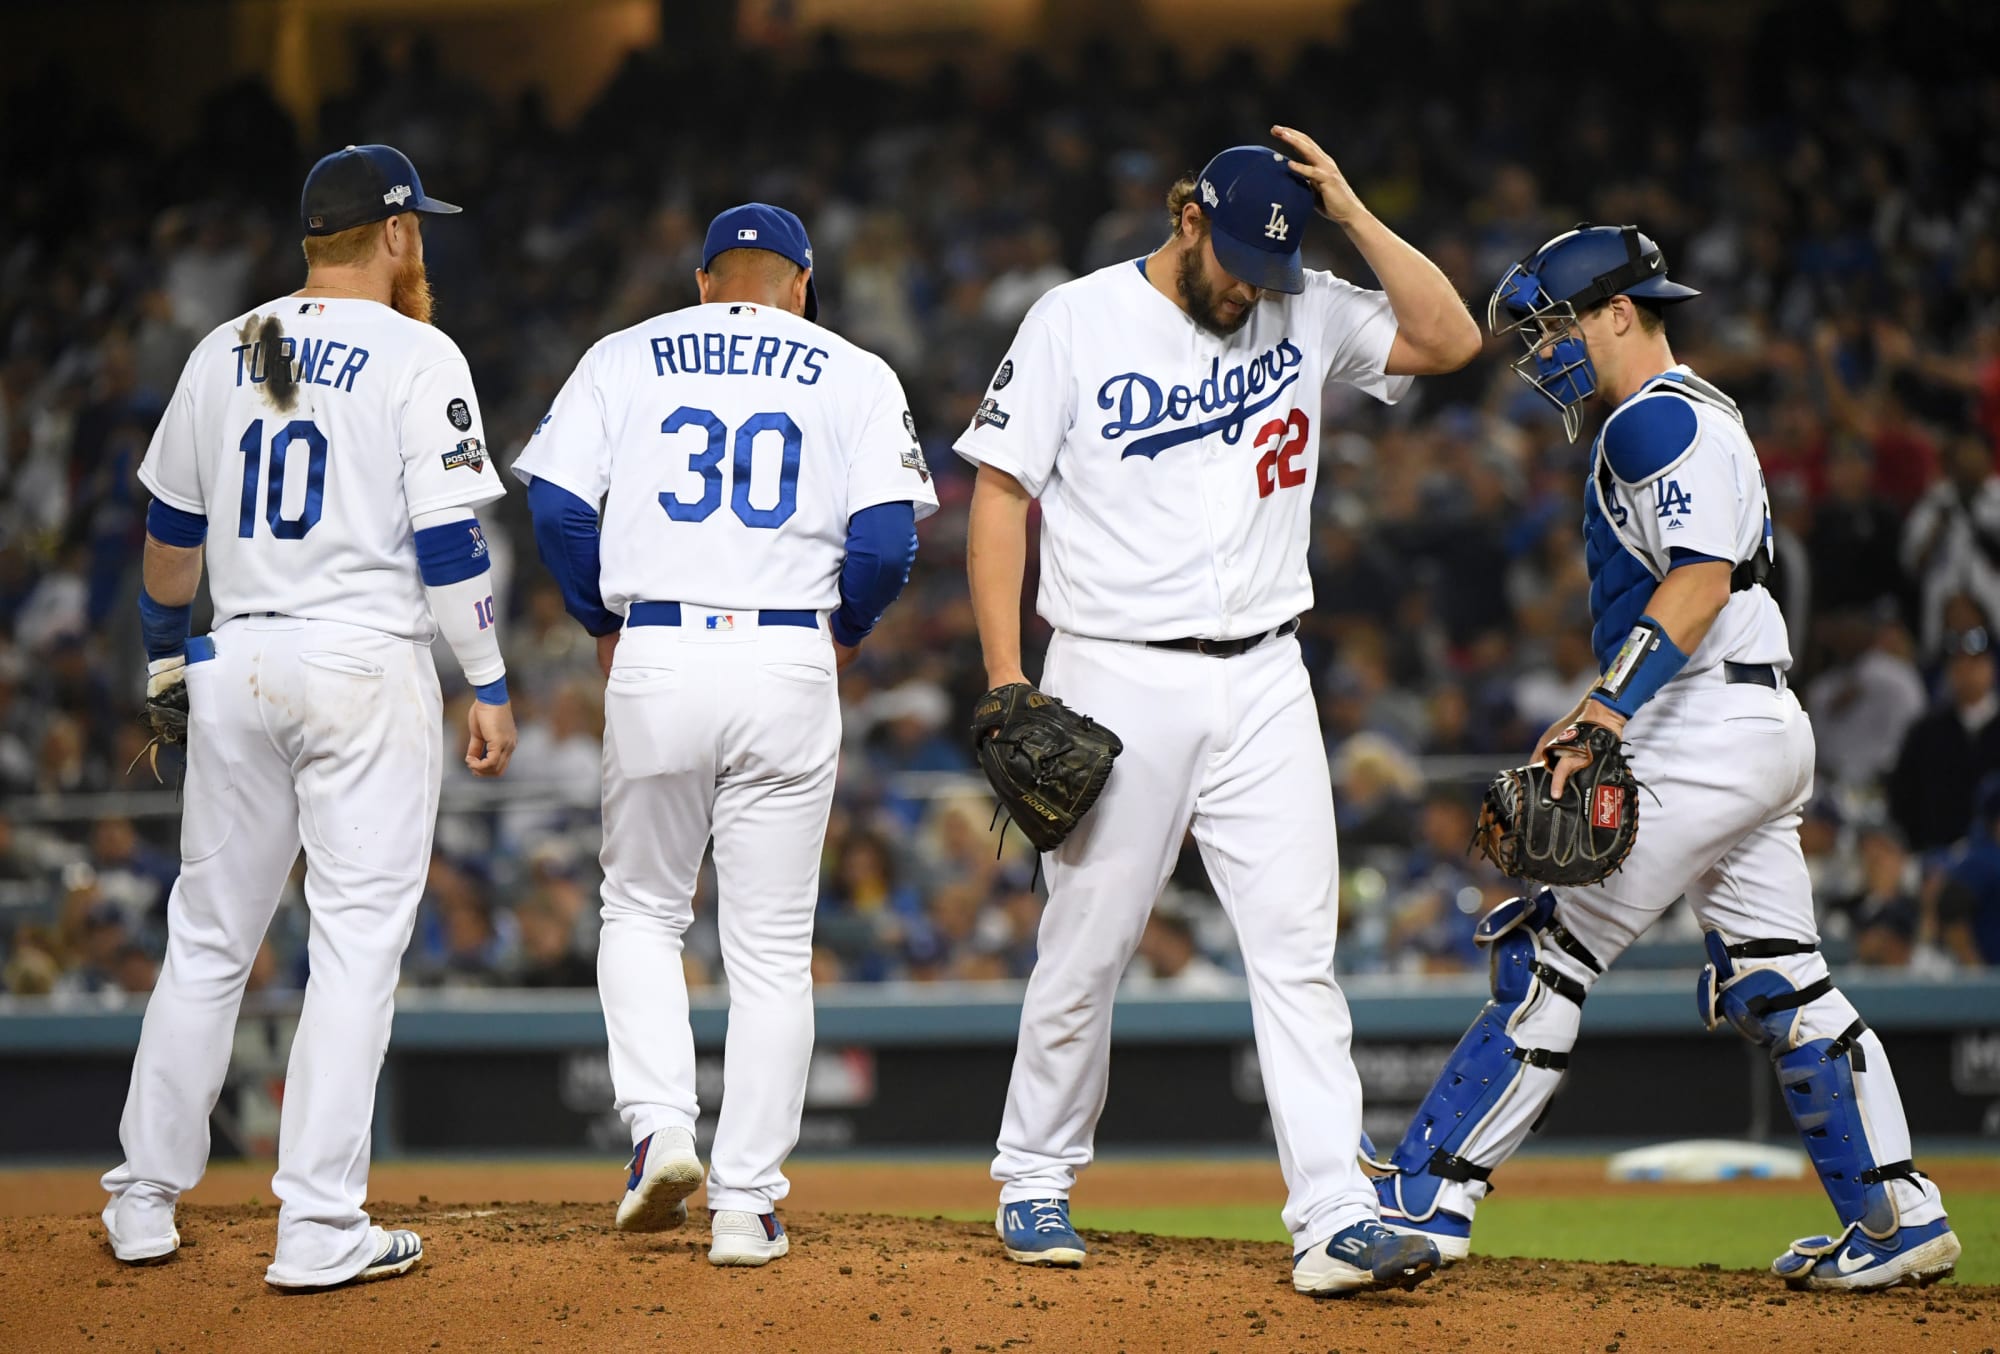 Dodgers assess wreckage of disappointing season